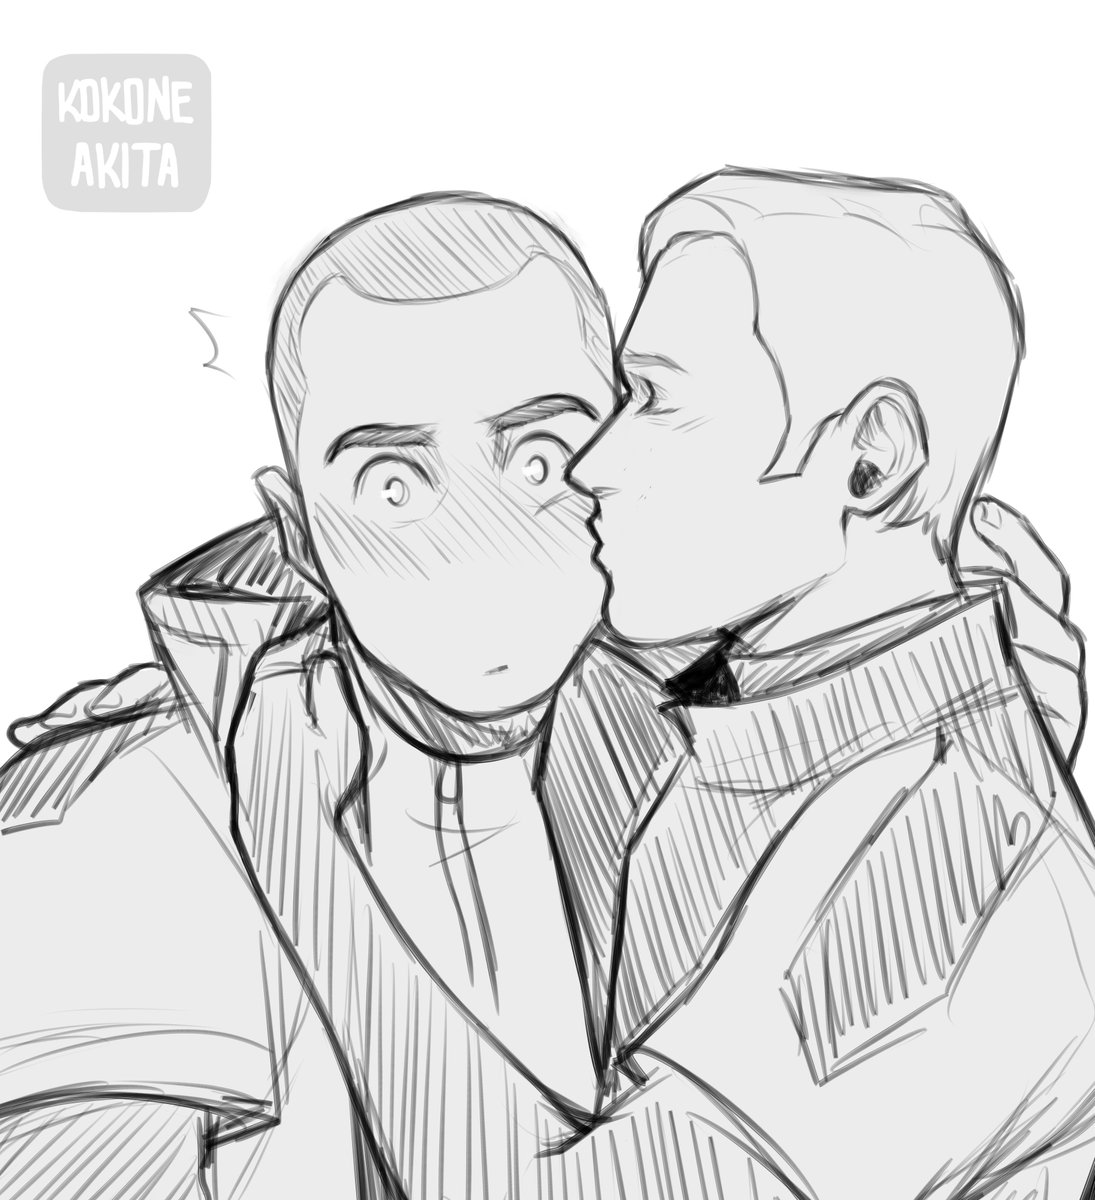 "honestly if someone tenderly cradled my face i think at this point i would probably blackout"

#simarkus #DetroitBecomeHuman 